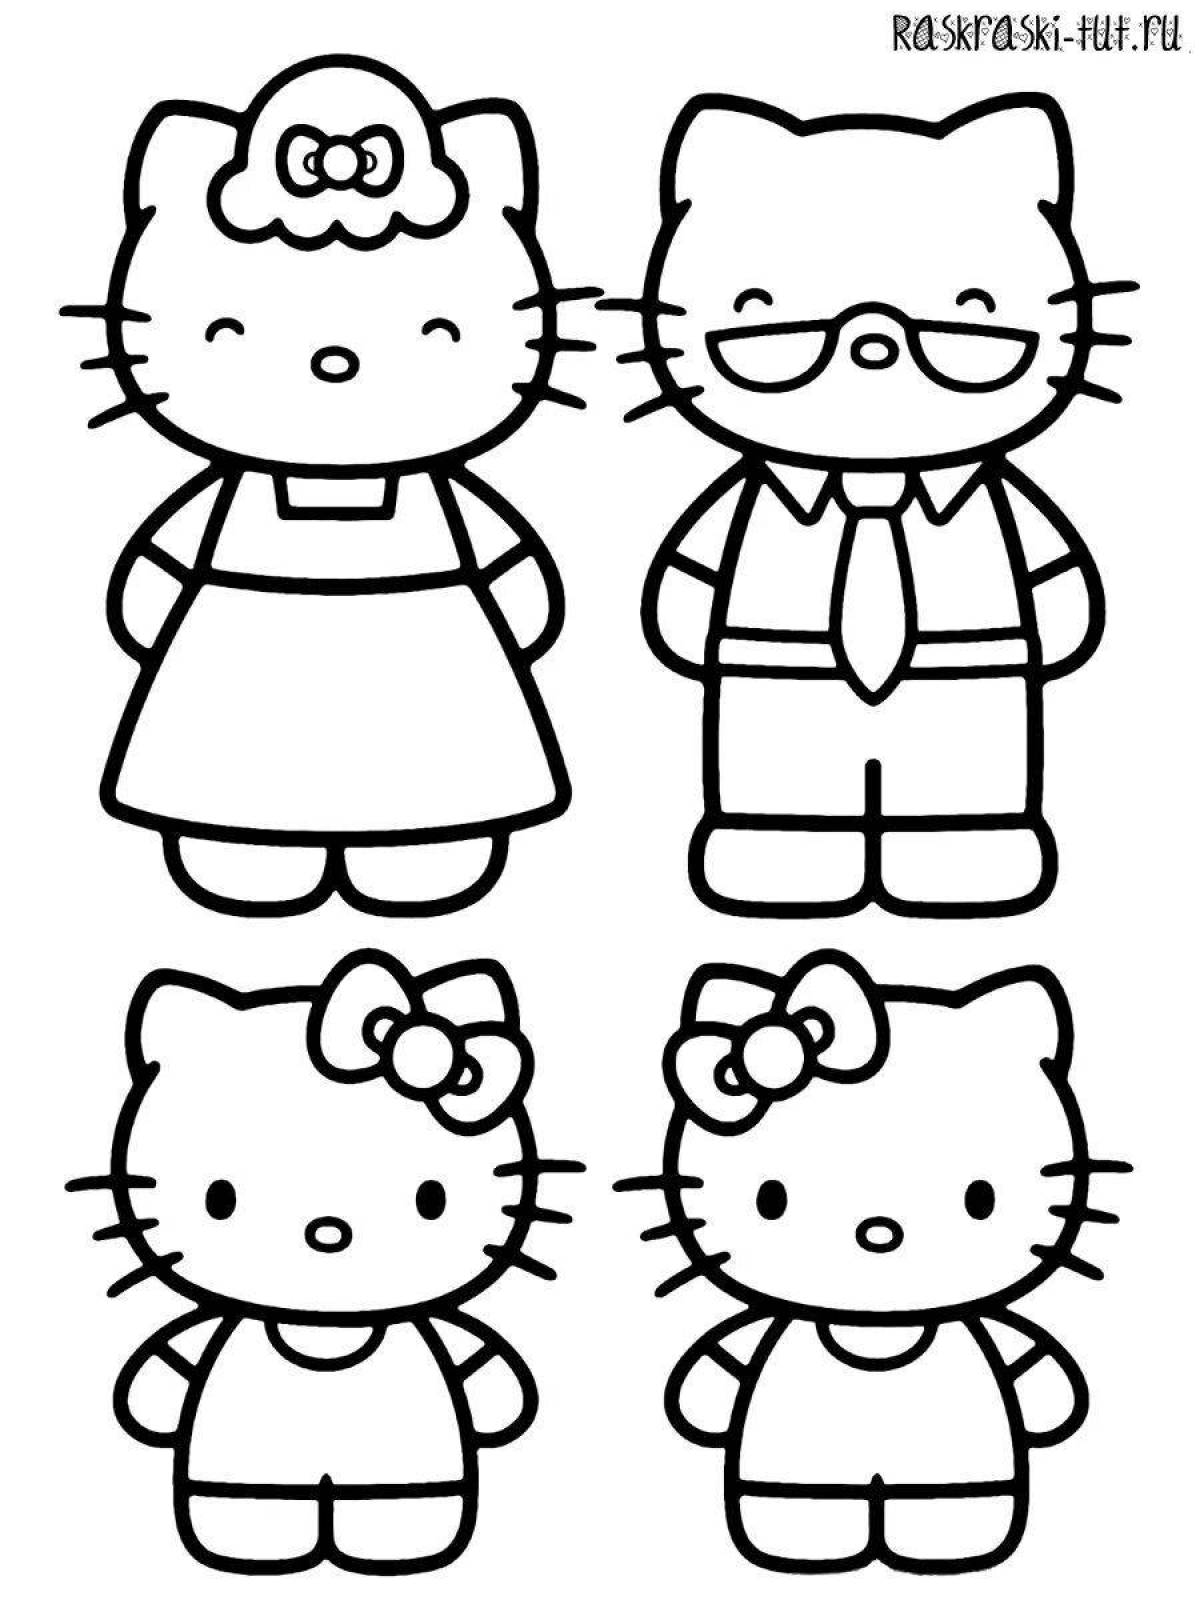 An animated hello kitty coloring page